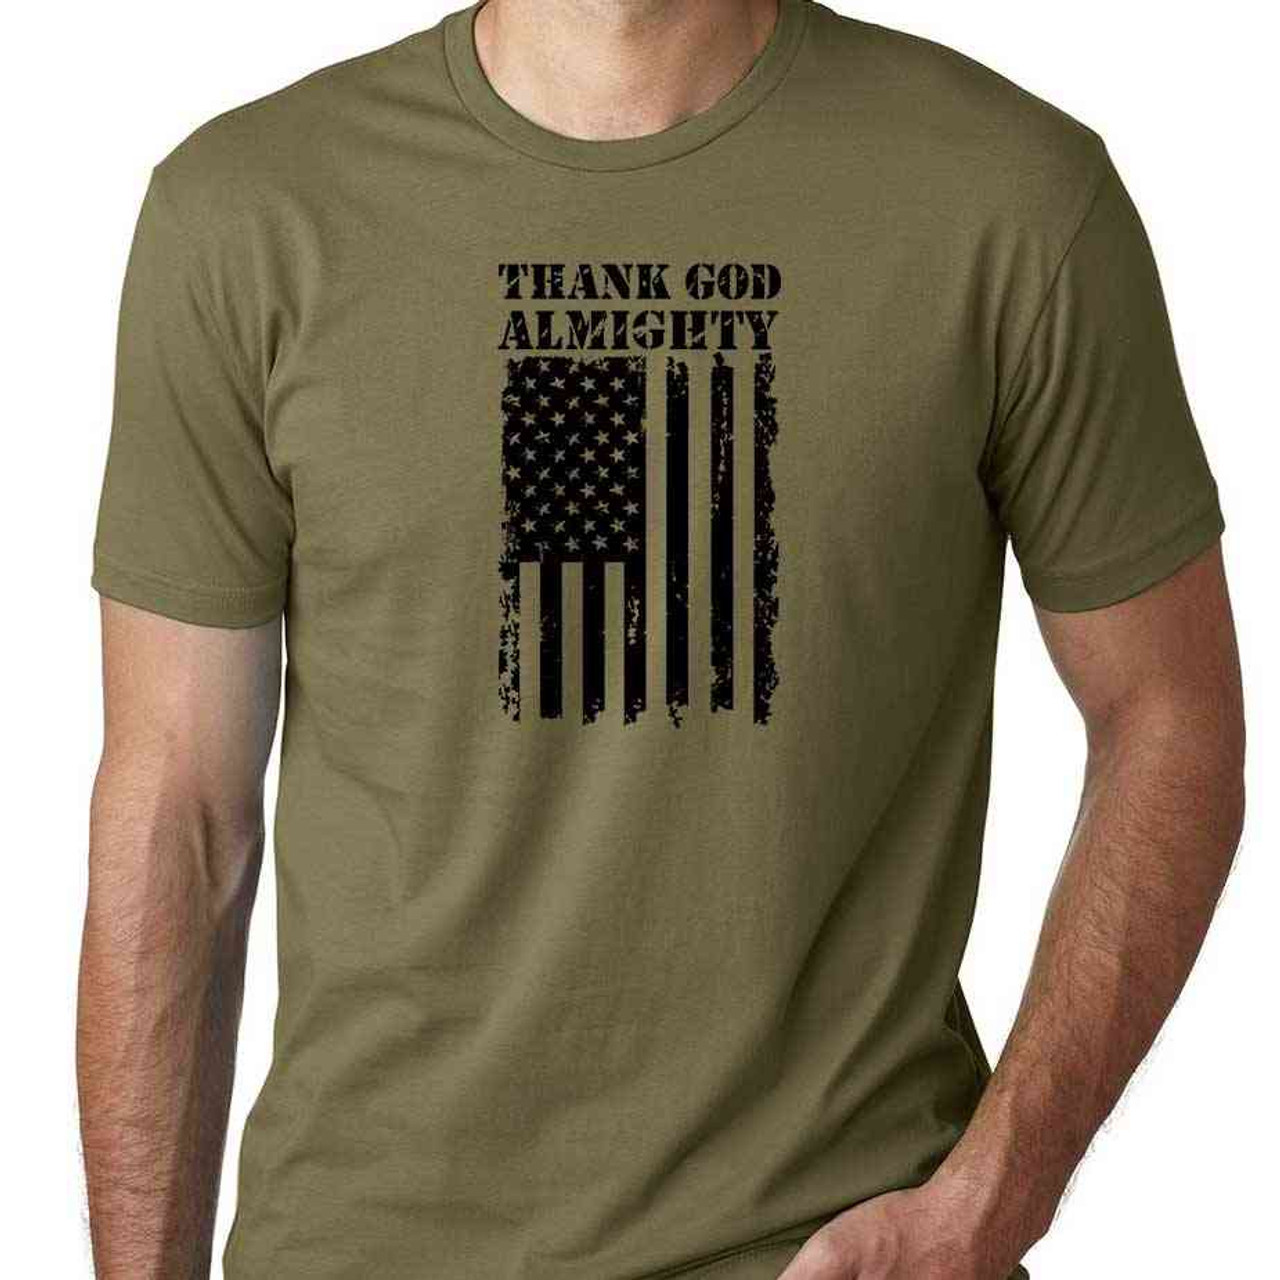 Thank God Almighty - Special Edition T-Shirt